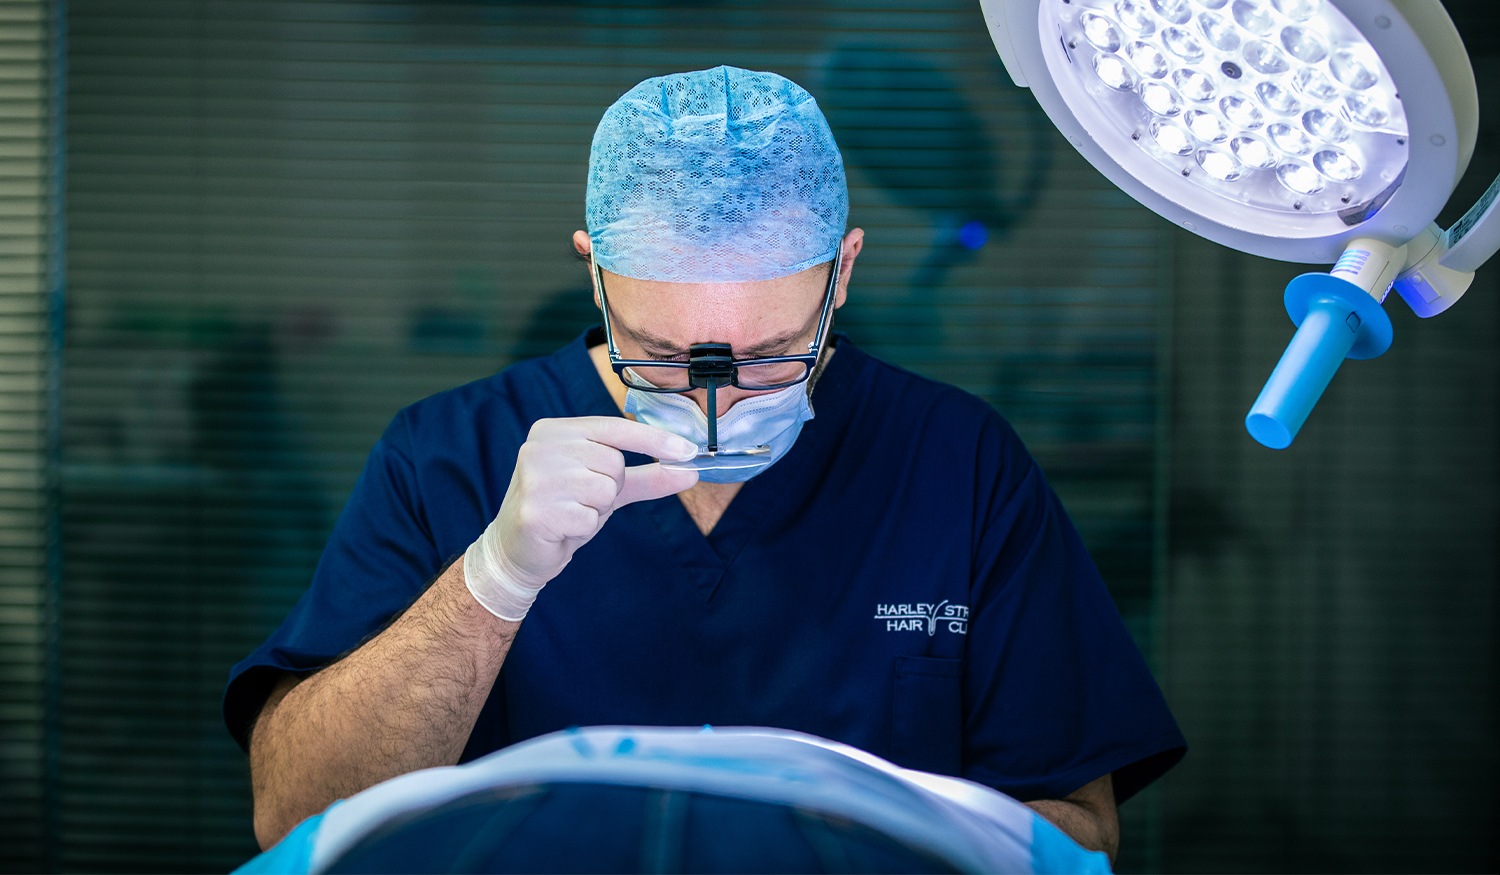 Qualifications To Look For In A Good Hair Transplant Surgeon